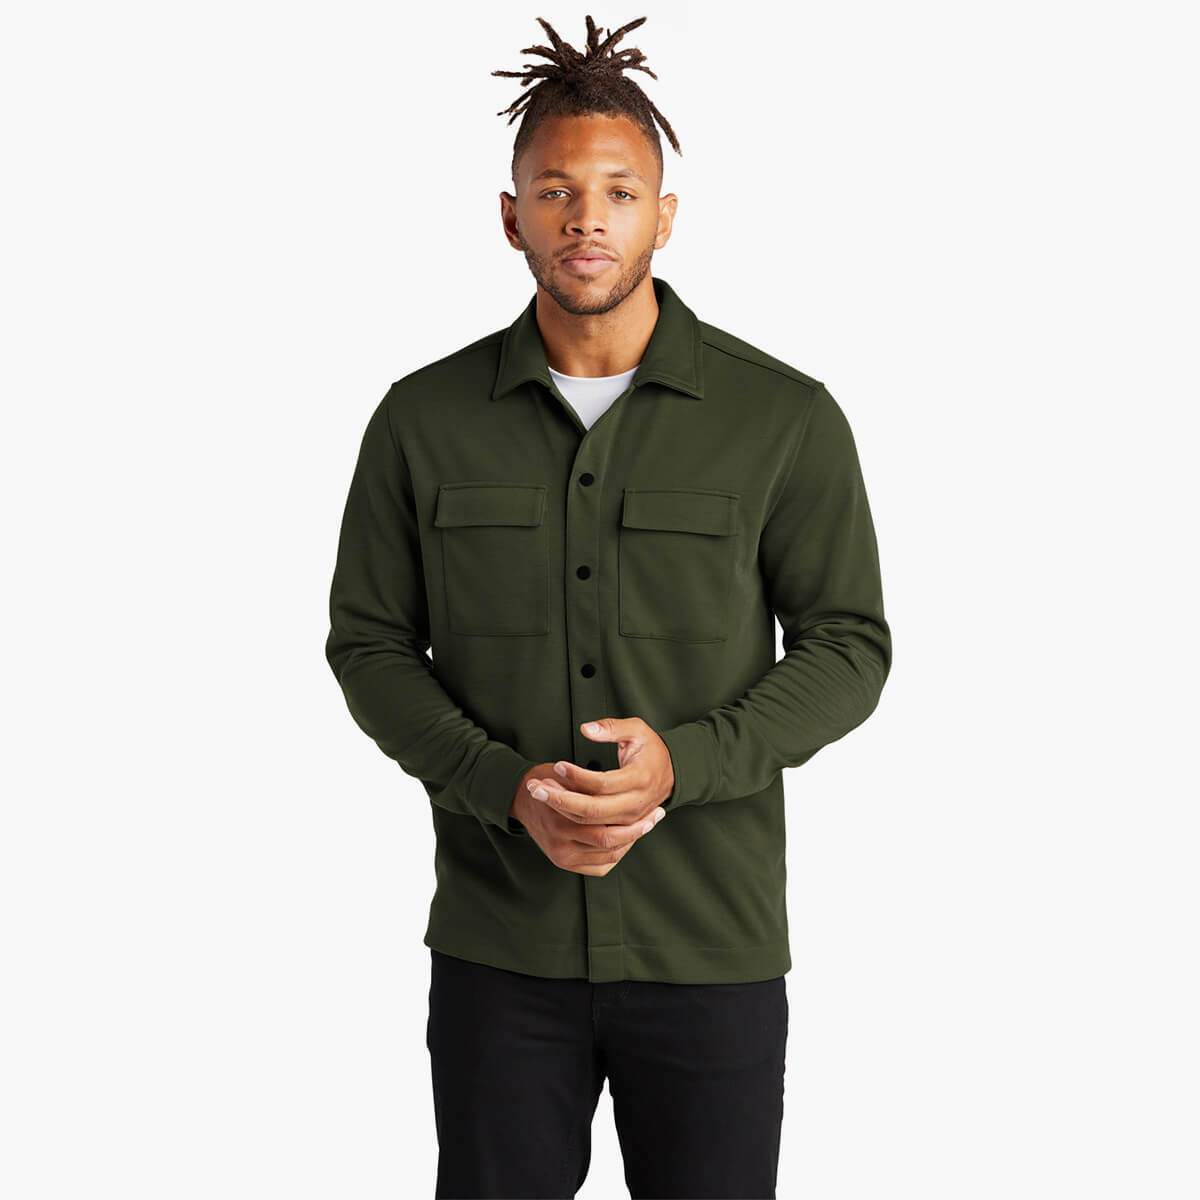 The Essentials Mercer + Mettle ™ Double-Knit Snap Jacket